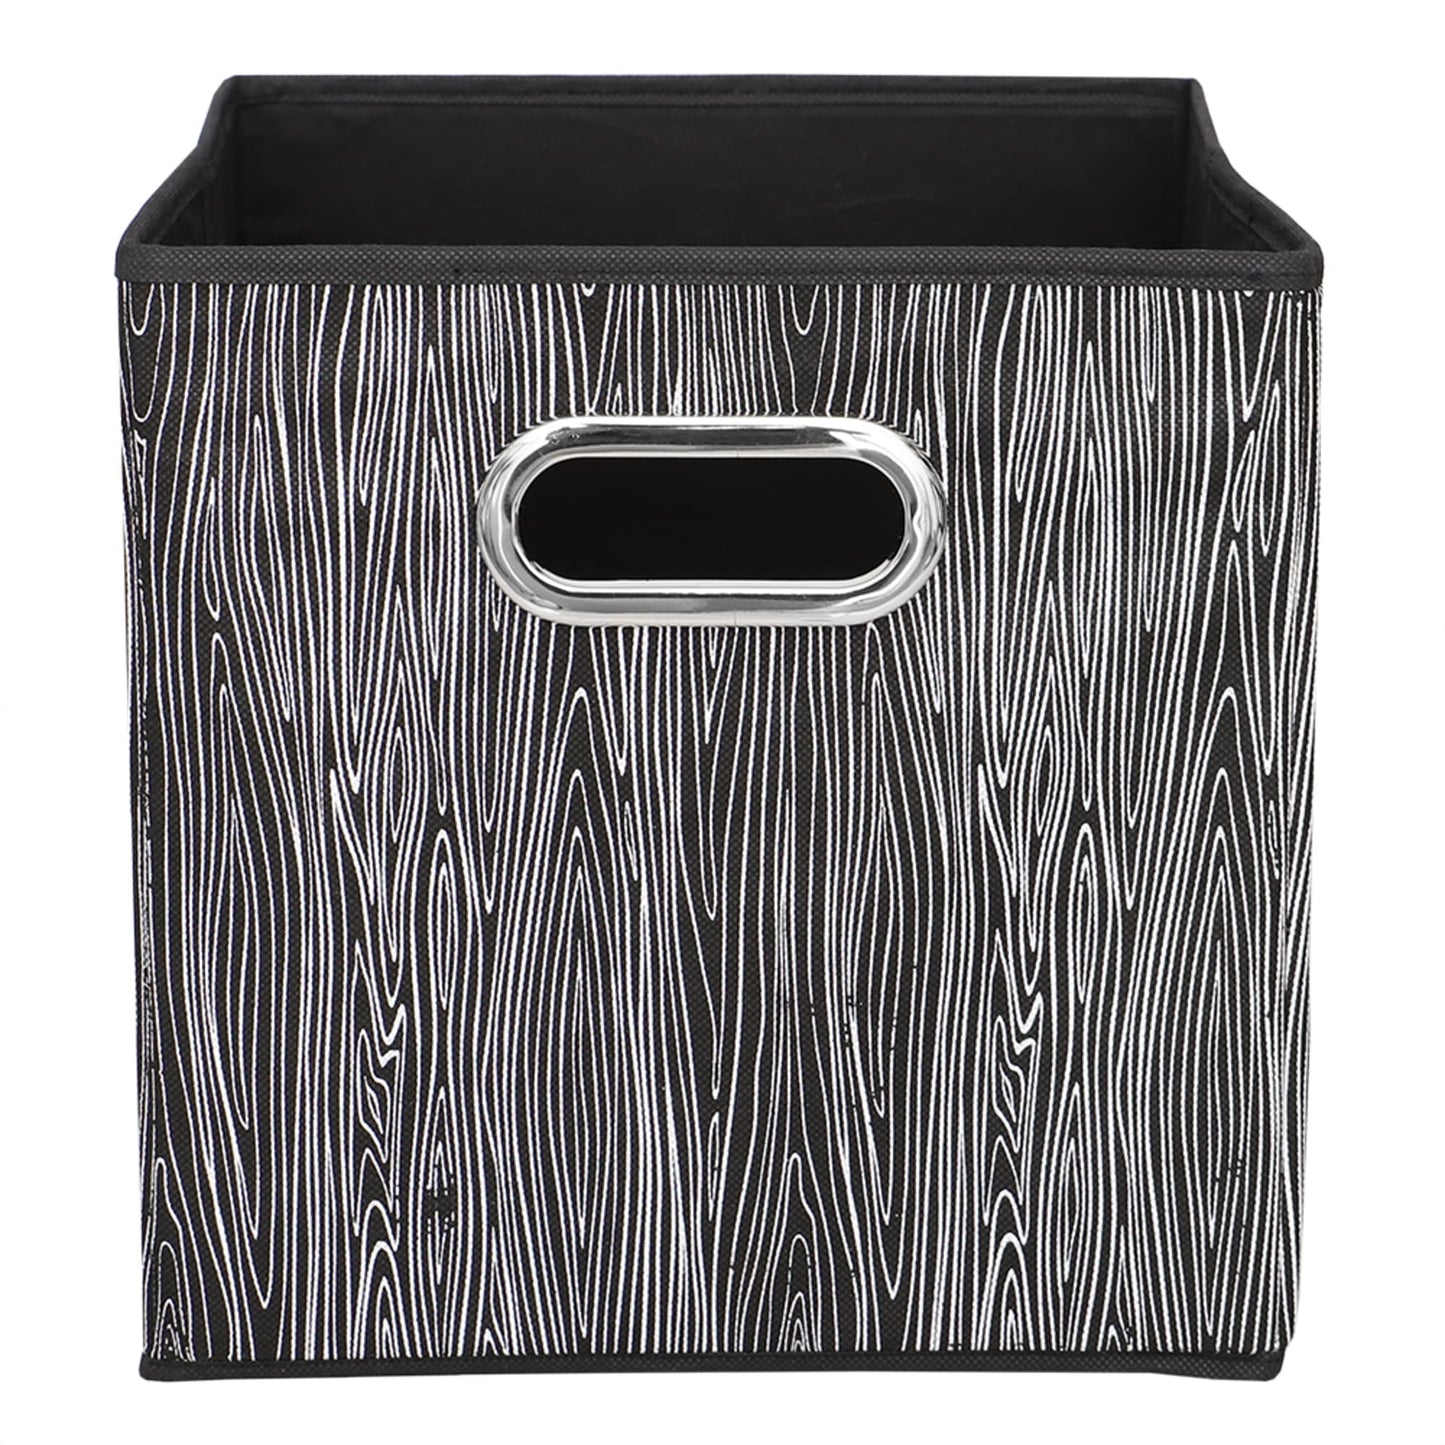 Wood Tone Collapsible Non-Woven Storage Bin with Grommet Handle, Black